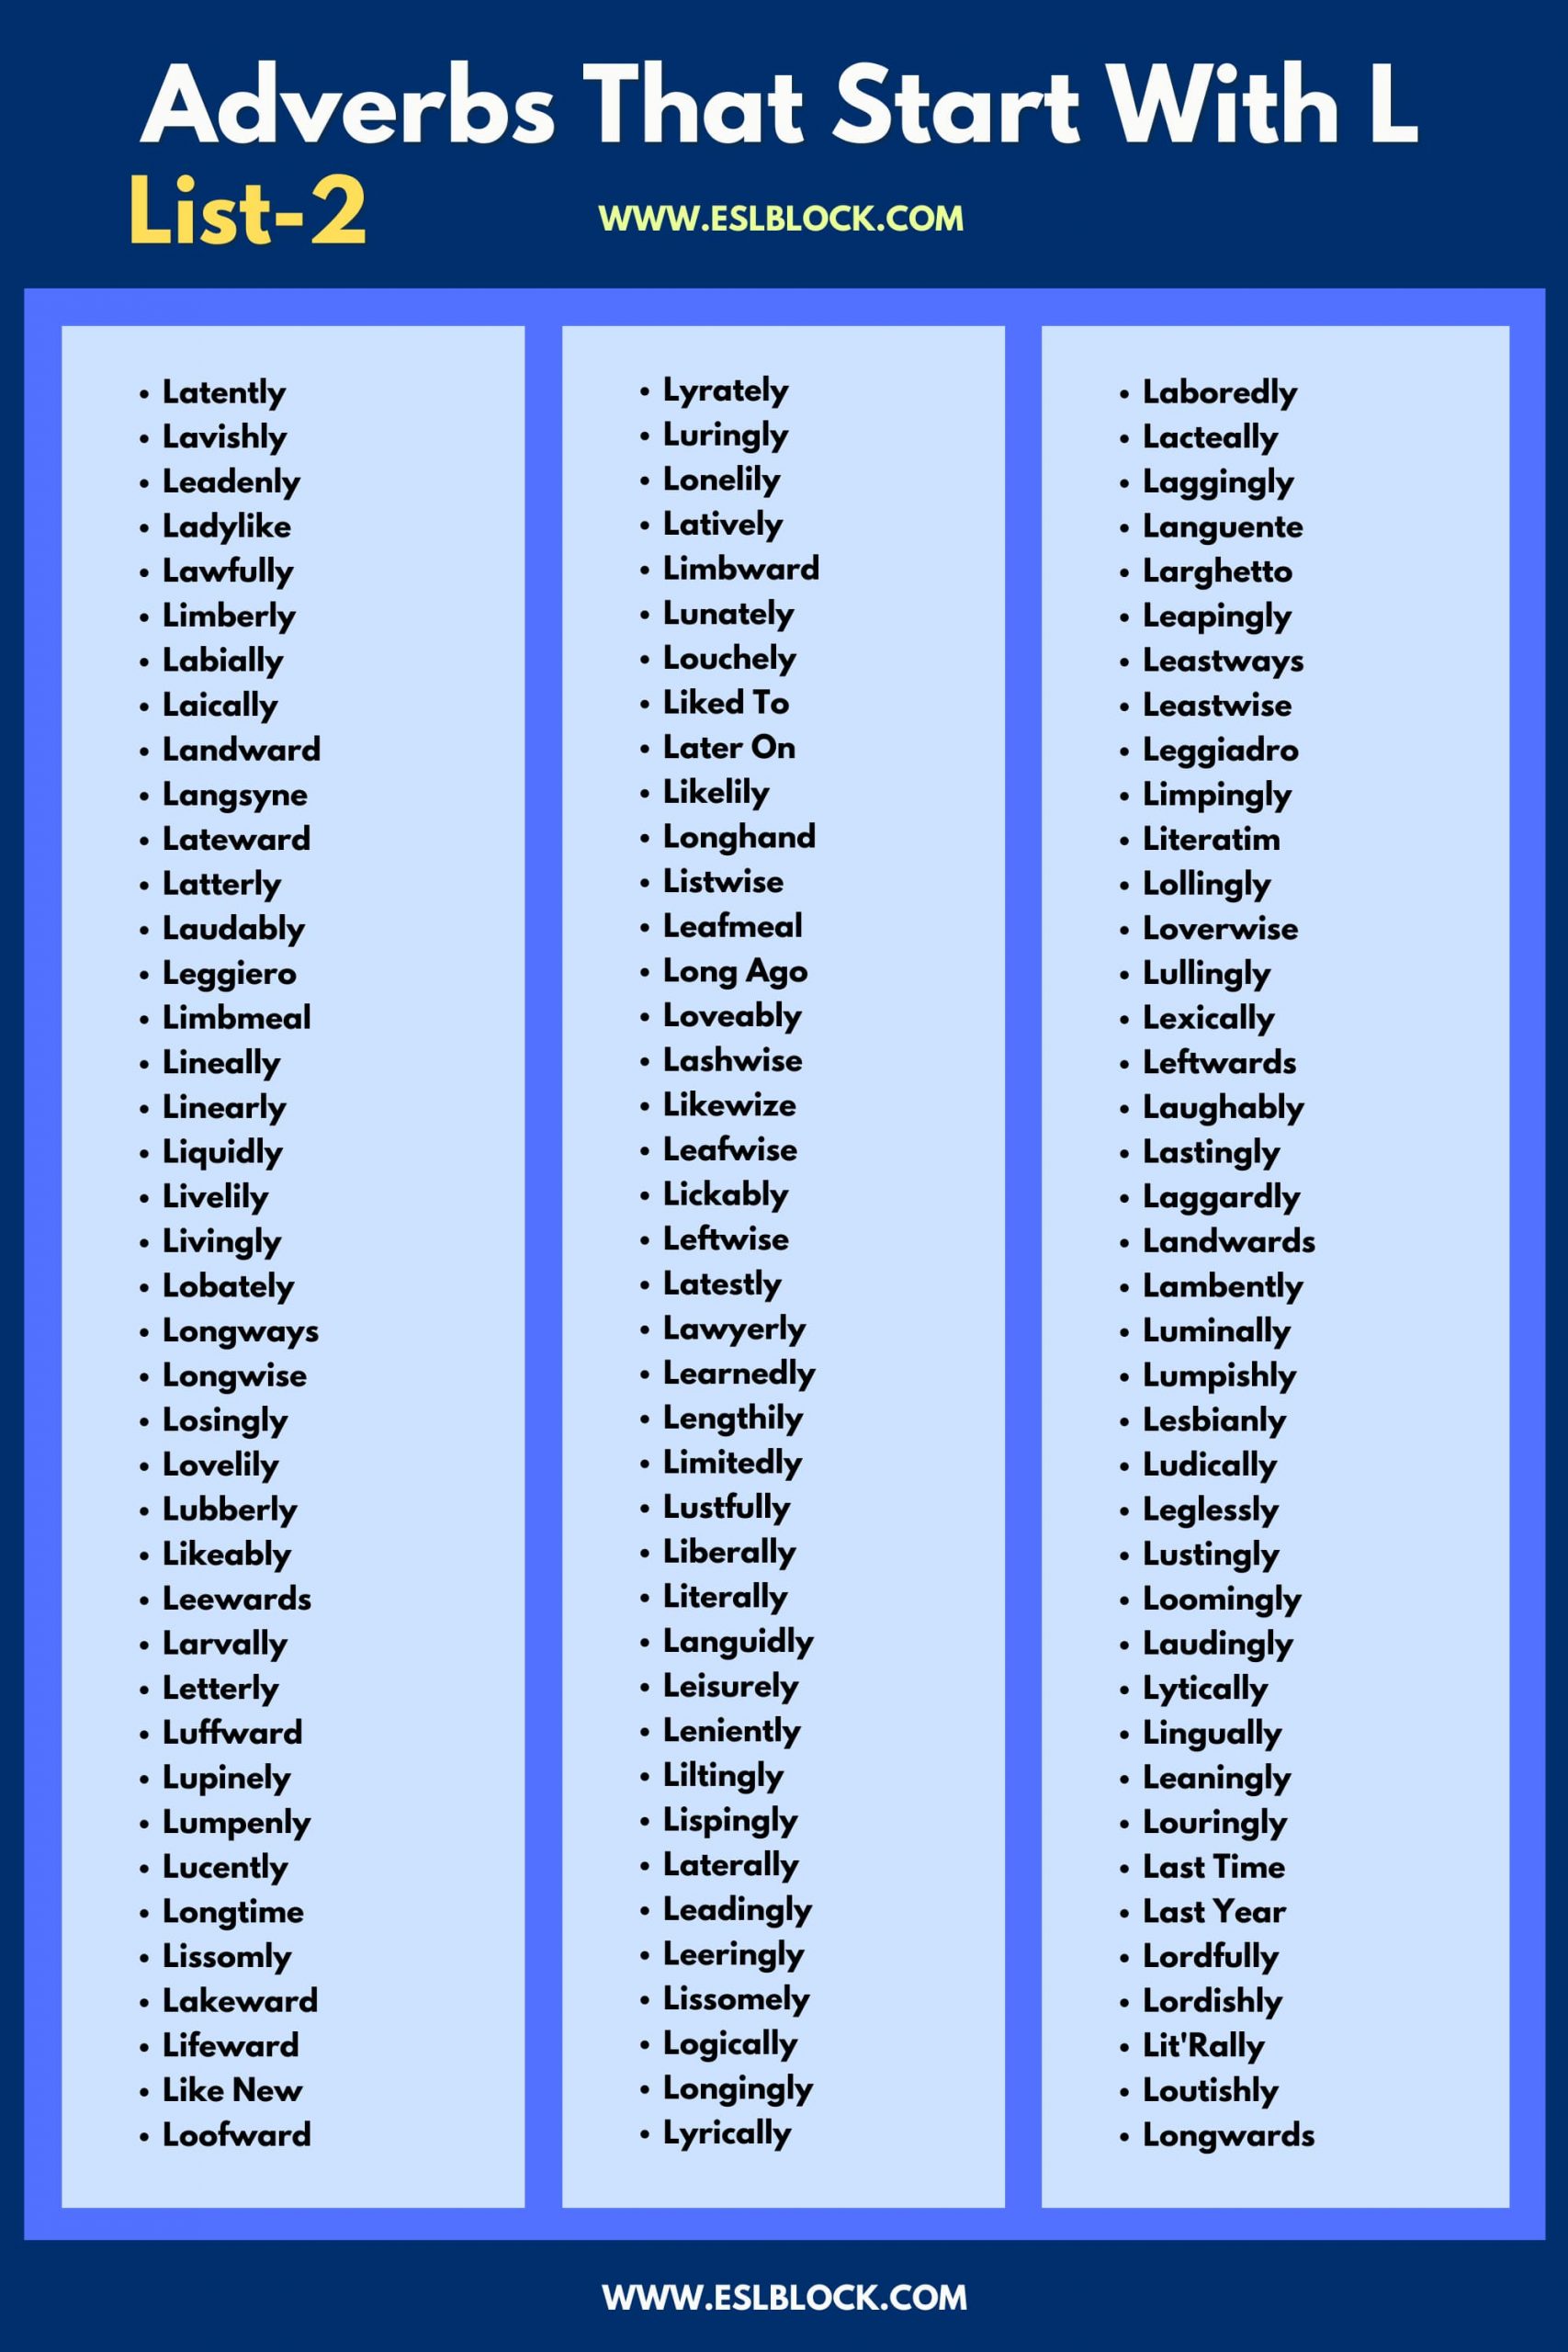 100 Example Sentences Using Adverbs, 4 Letter Adverbs That Start with L, 4 Letter Words, 5 Letter Adverbs That Start with L, 5 Letter Words, 6 Letter Adverbs That Start with L, 6 Letter Words, A to Z Adverbs, AA Adverbs, Adverb vocabulary words, Adverbs, Adverbs That Start with L, Adverbs with Example Sentences, All Adverbs, Types of Adverbs, Types of Adverbs with Example Sentences, Vocabulary, What are Adverbs, What are the types of Adverbs, Words That with L